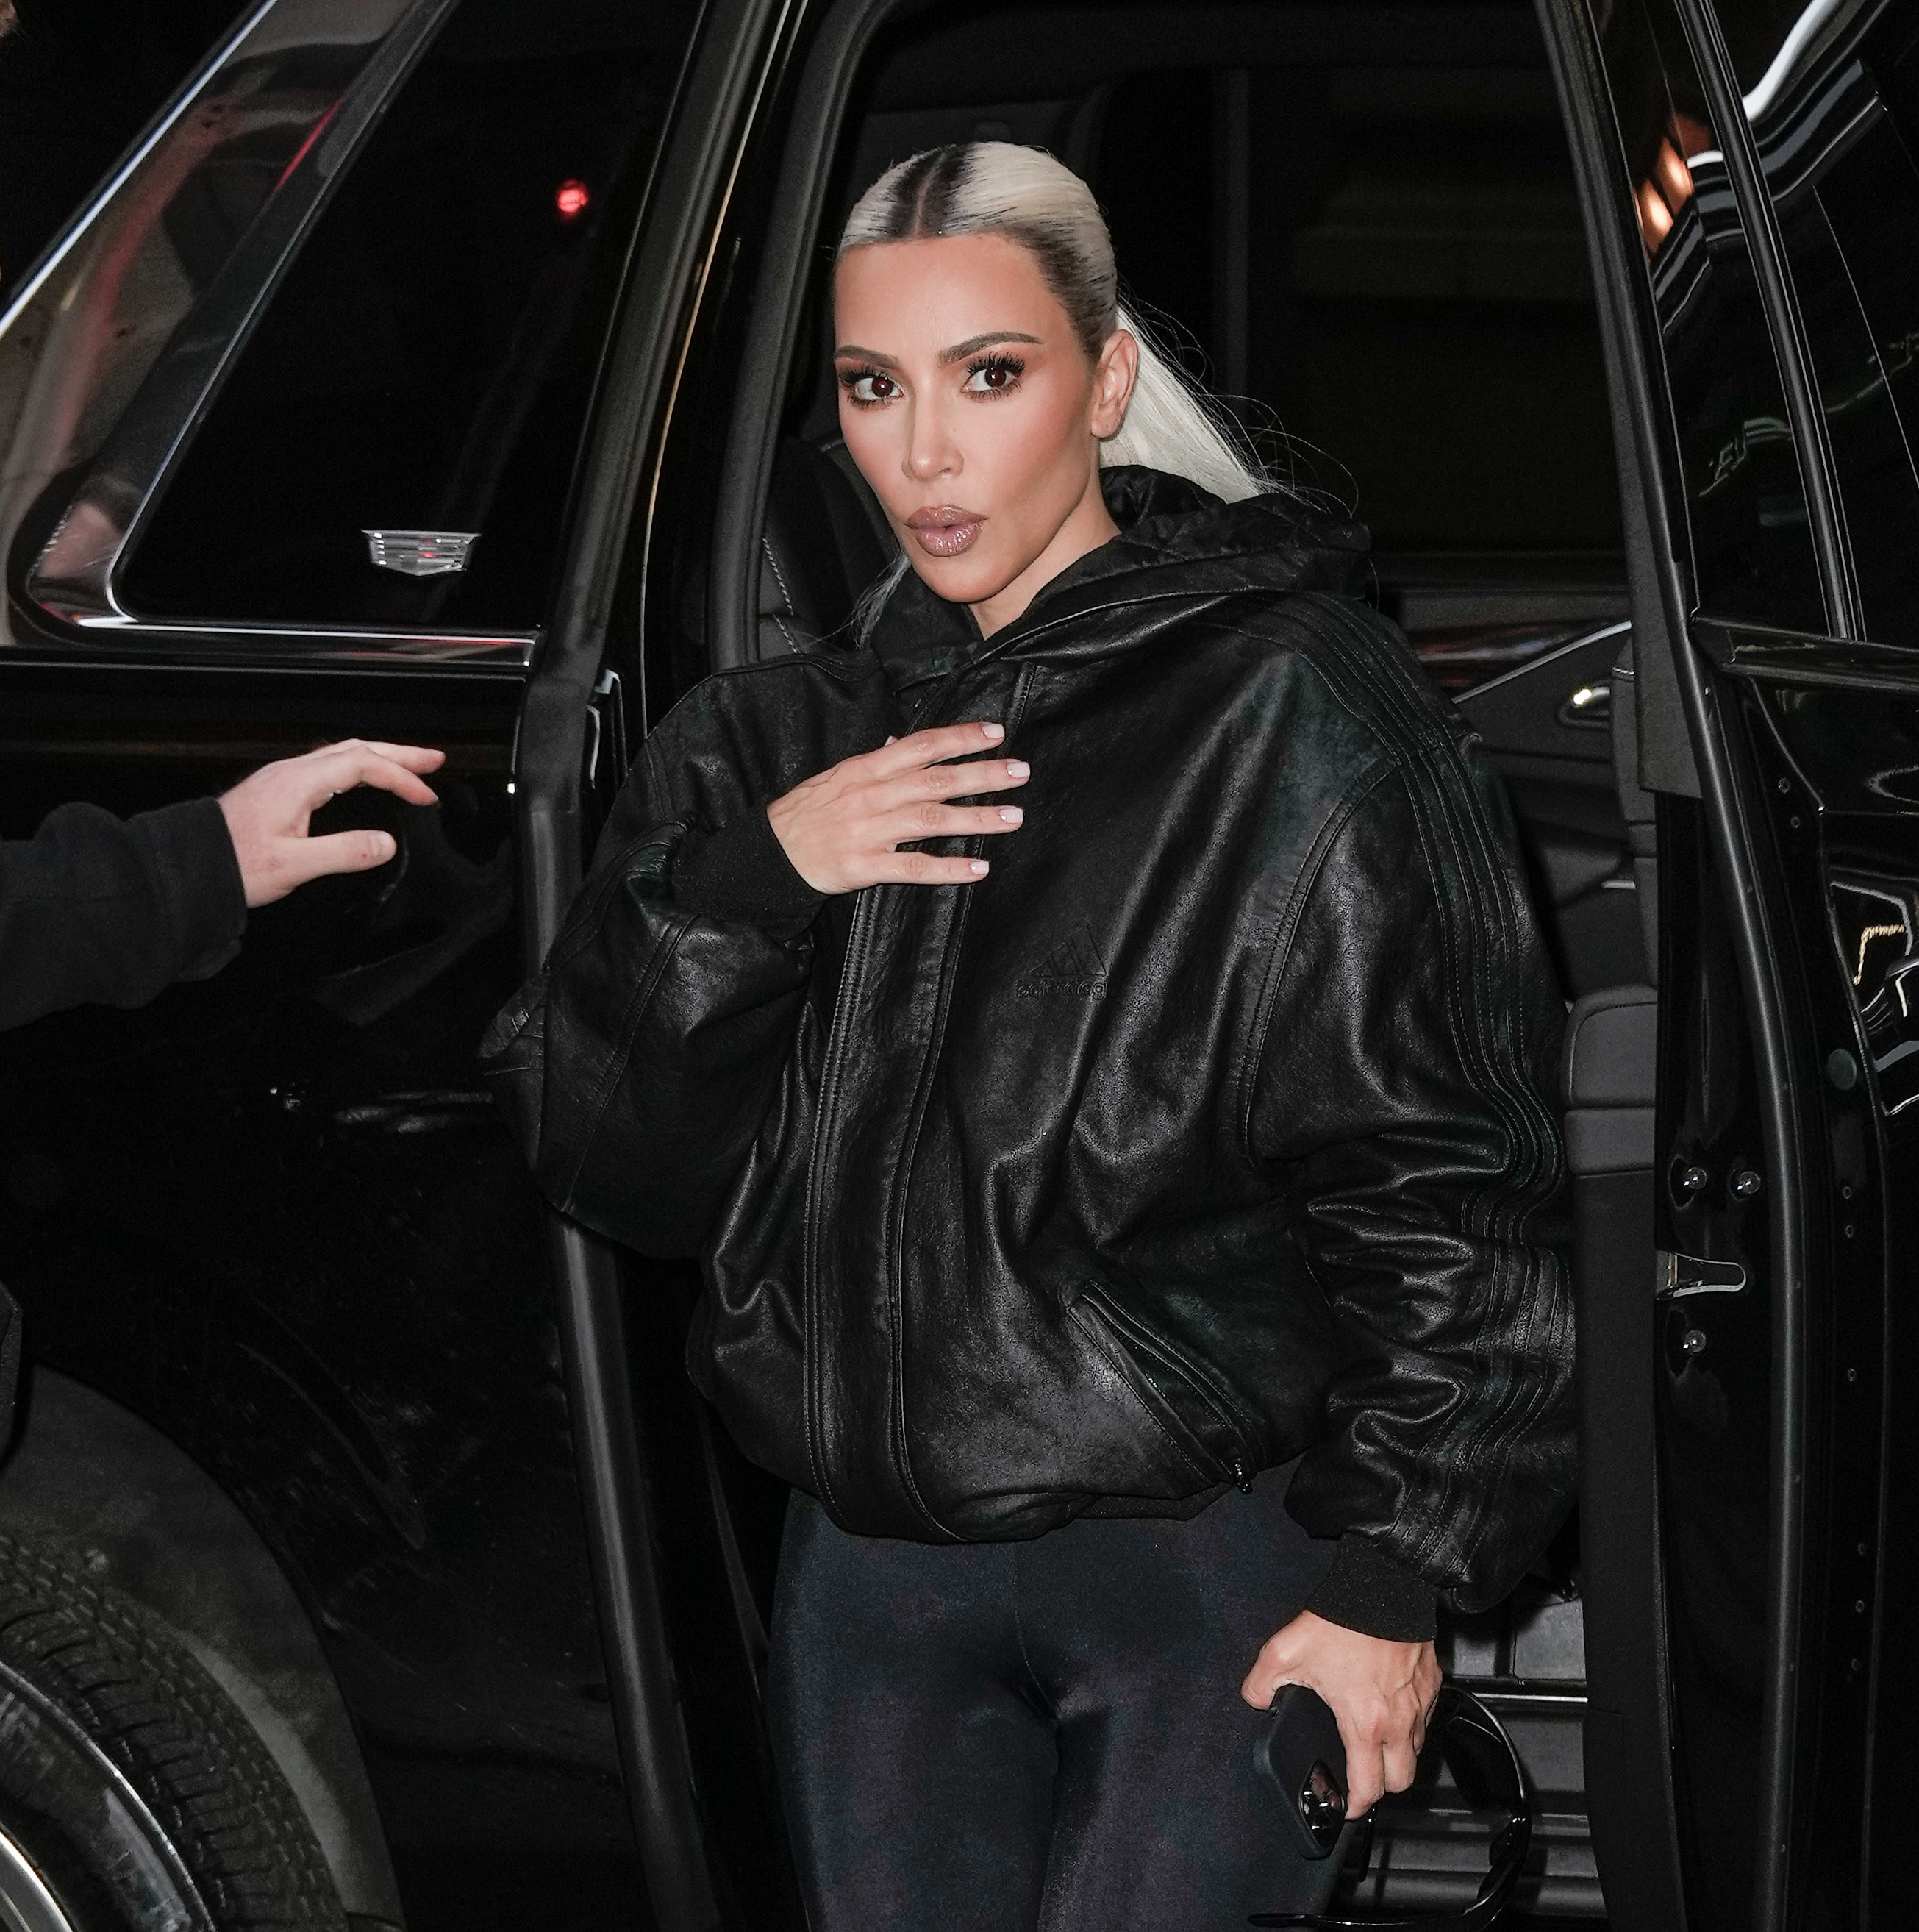 Kim in a leather jacket and emerging from a vehicle